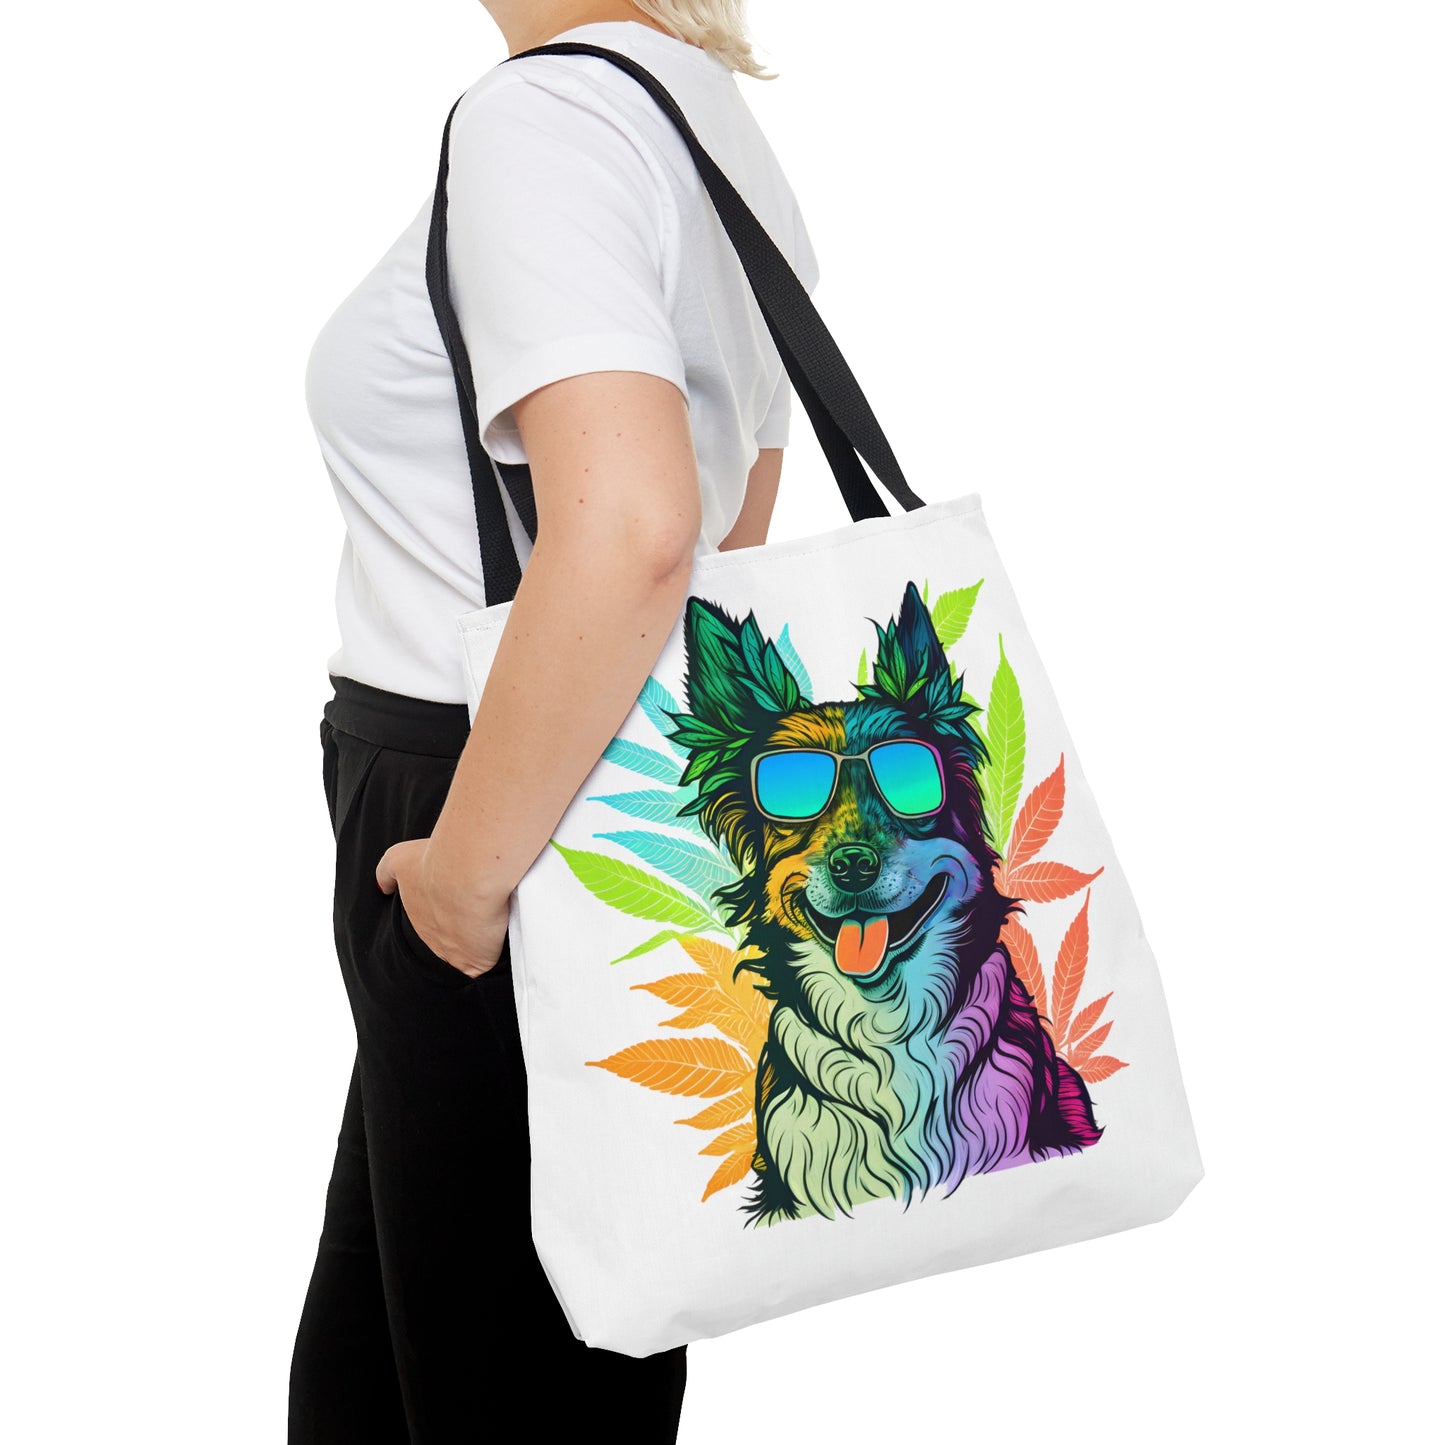 A woman in a white shirt with blonde hair is using the Cool Border Collie With Shades and Weed Tote Bag carrying it on her shoulder